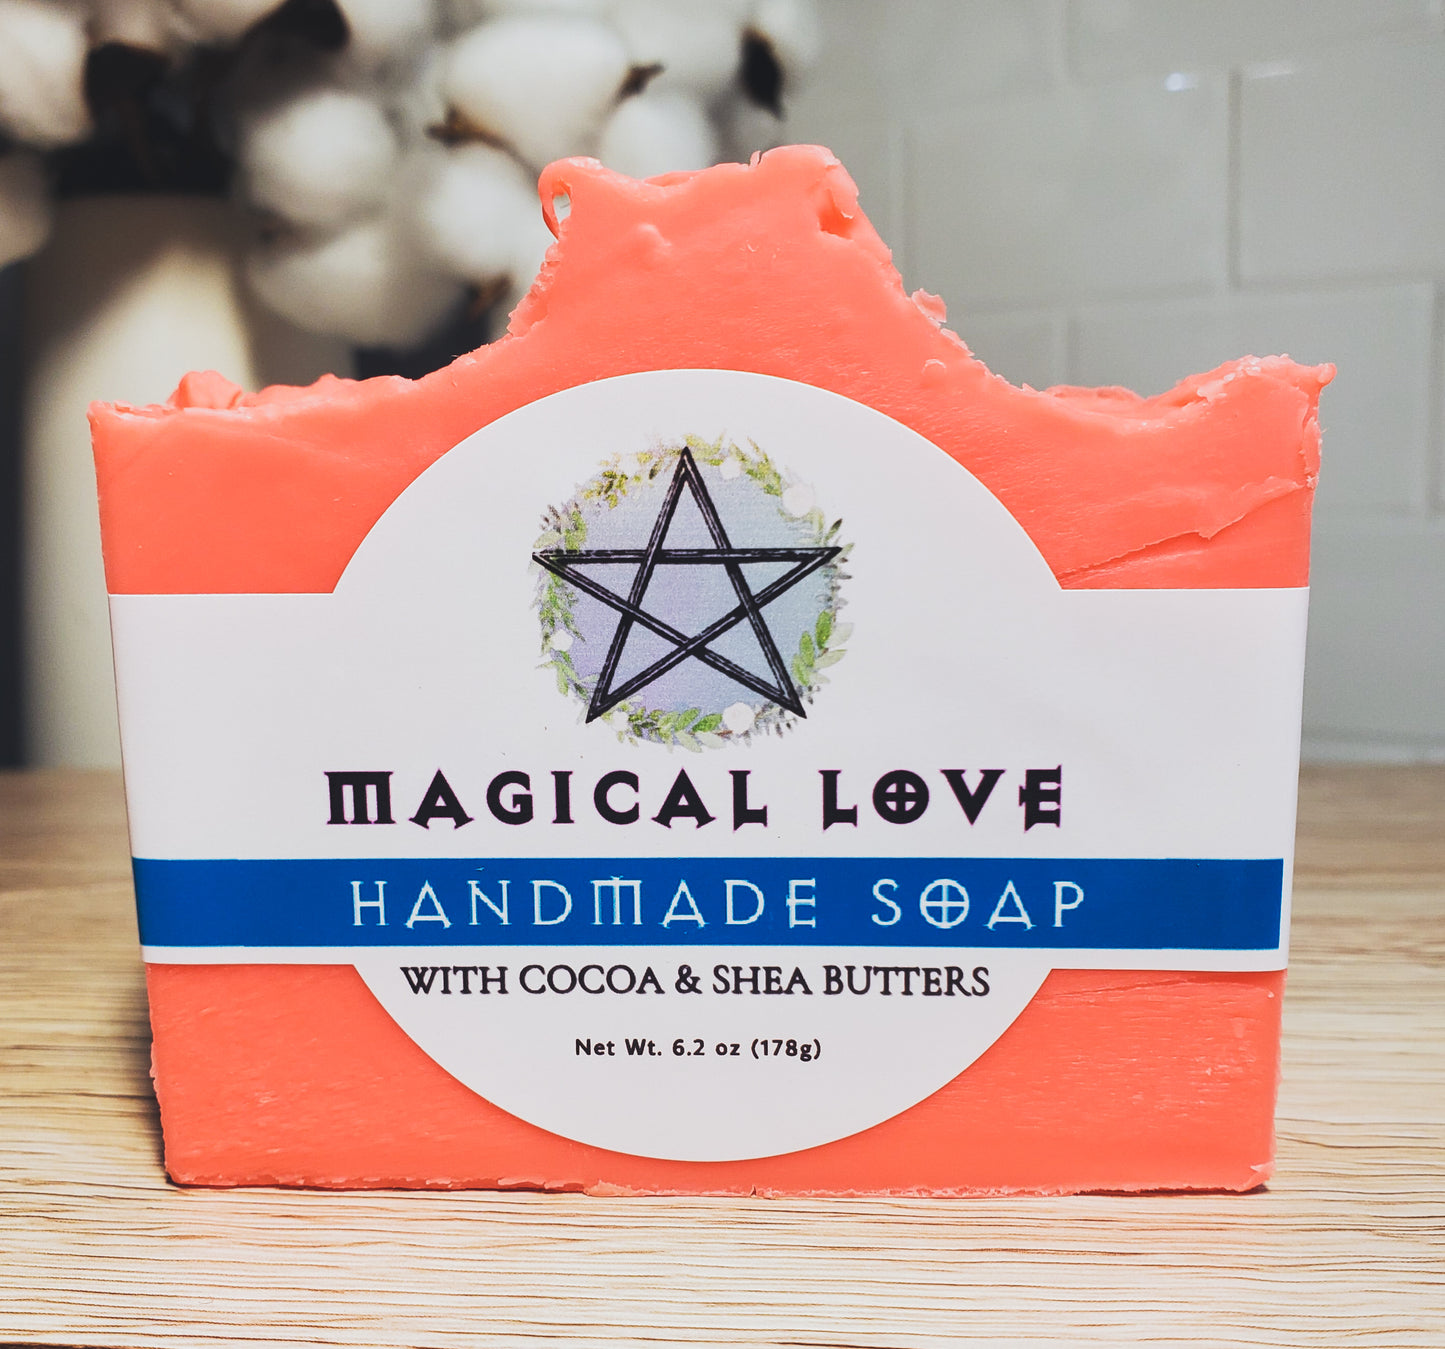 Photo of bar soap with White band label and blue bar across